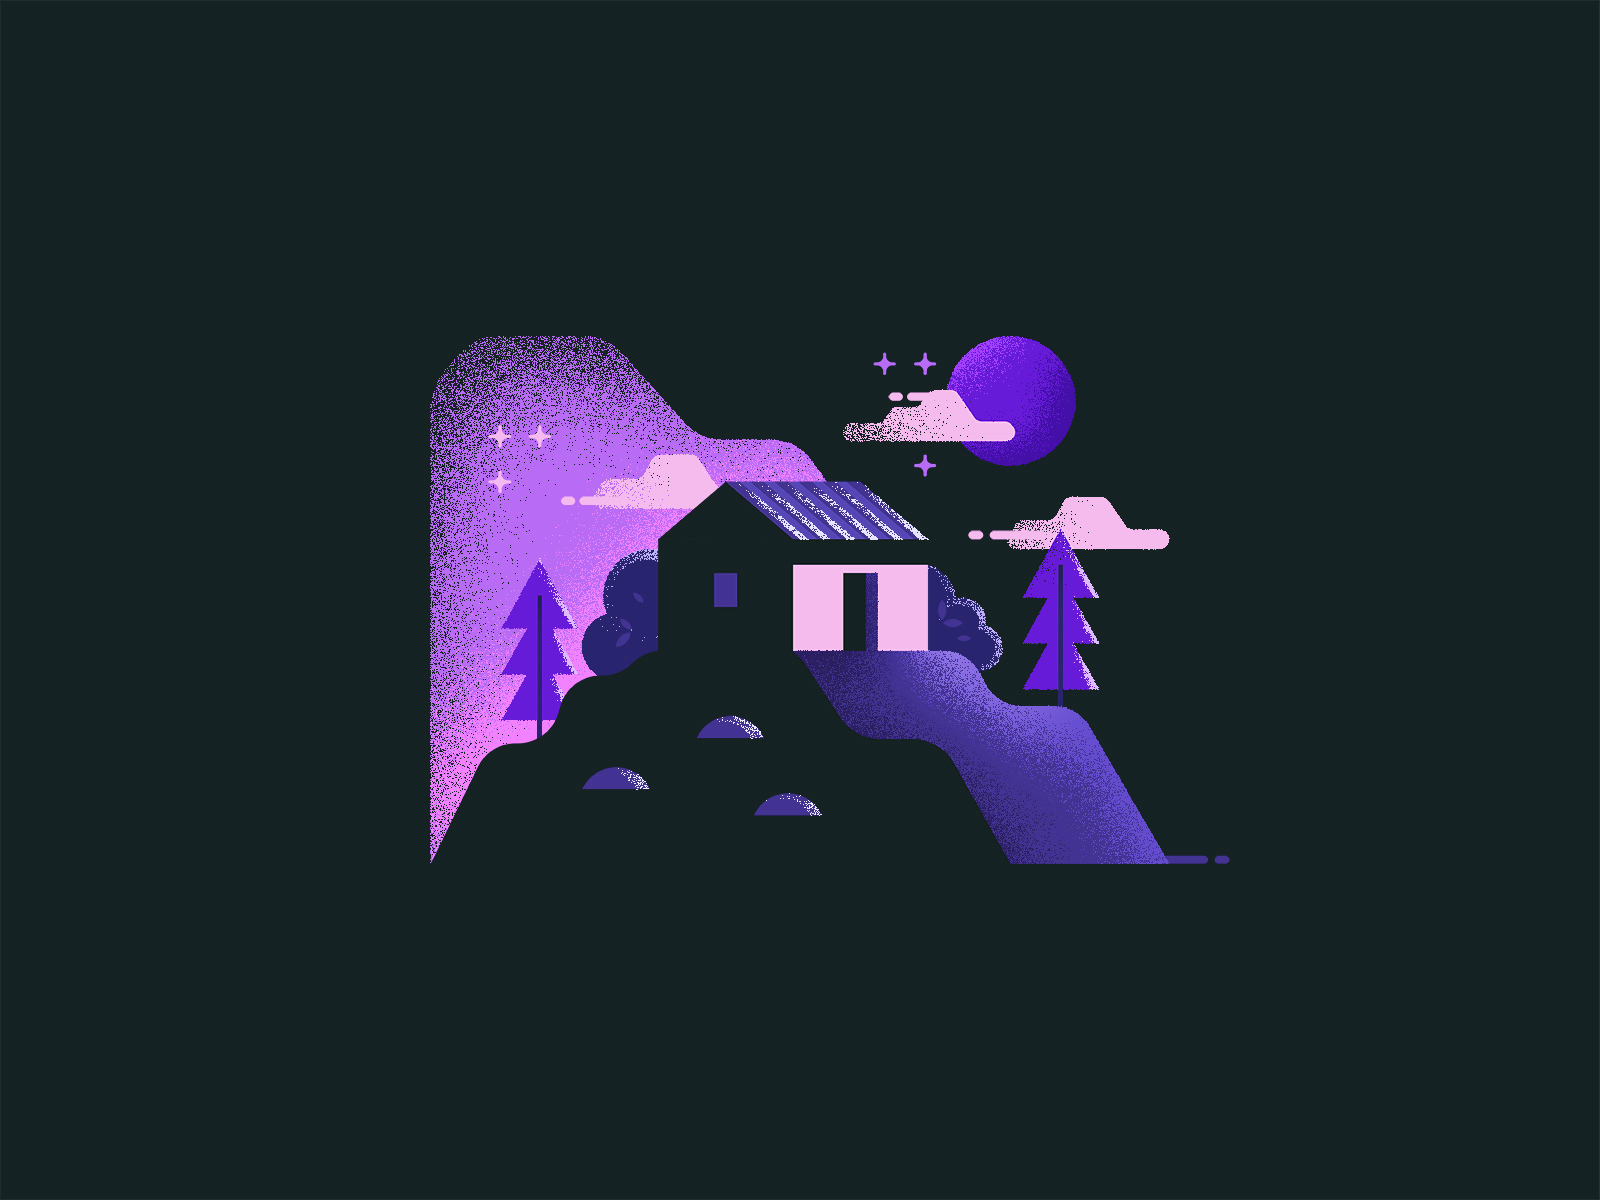 Home on hills by Shreyas Bendre on Dribbble